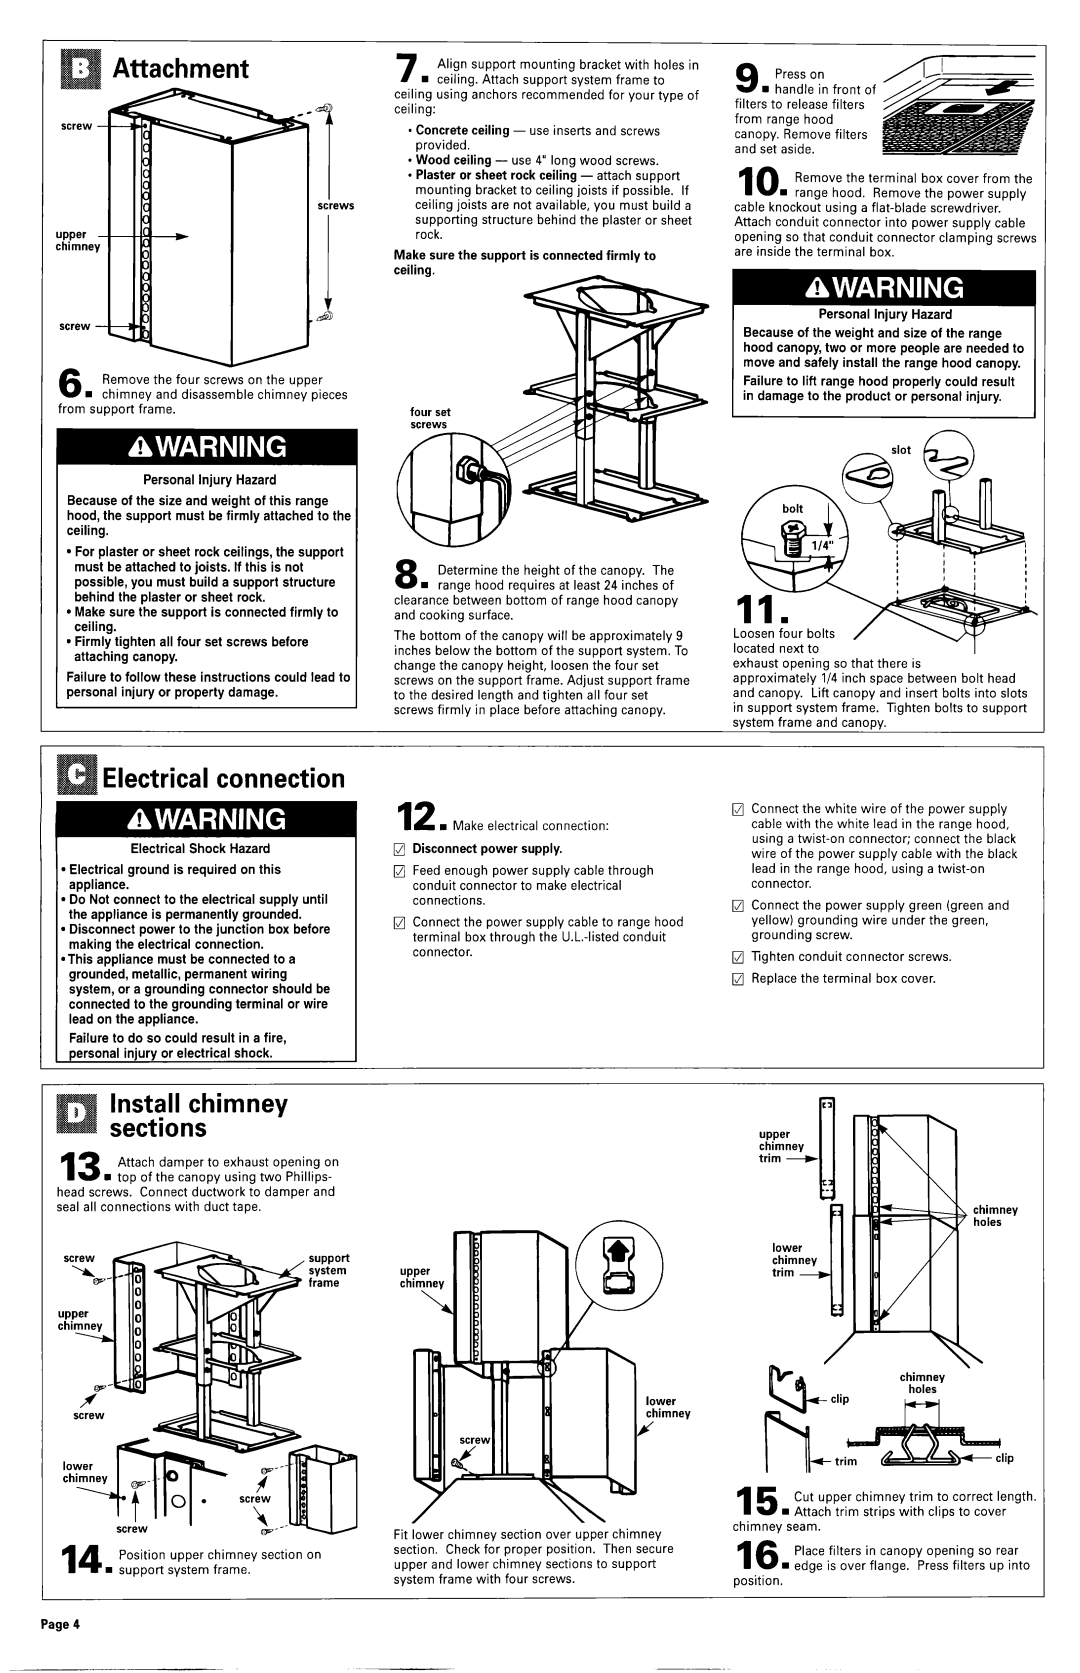 KitchenAid 883298, 6899552 dimensions Electrical connection, Install chimney sections 